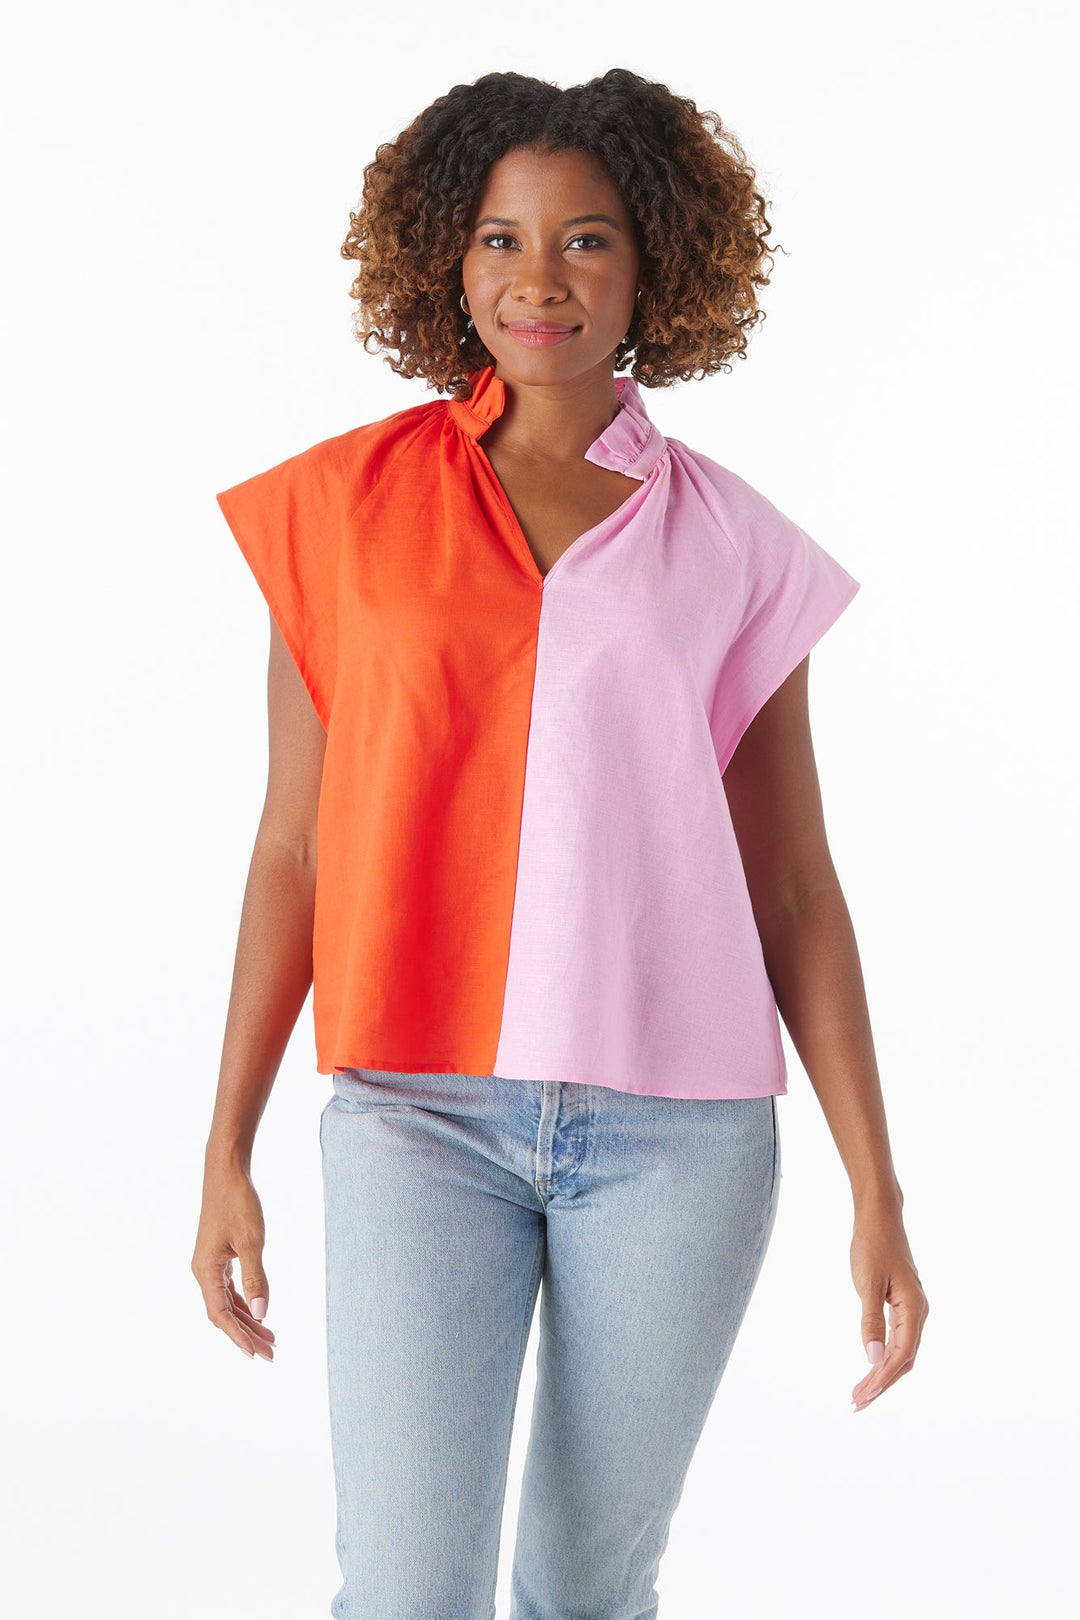 Crosby: Wilkes S/S Top: Lobster Garden rose - Shorely Chic Boutique